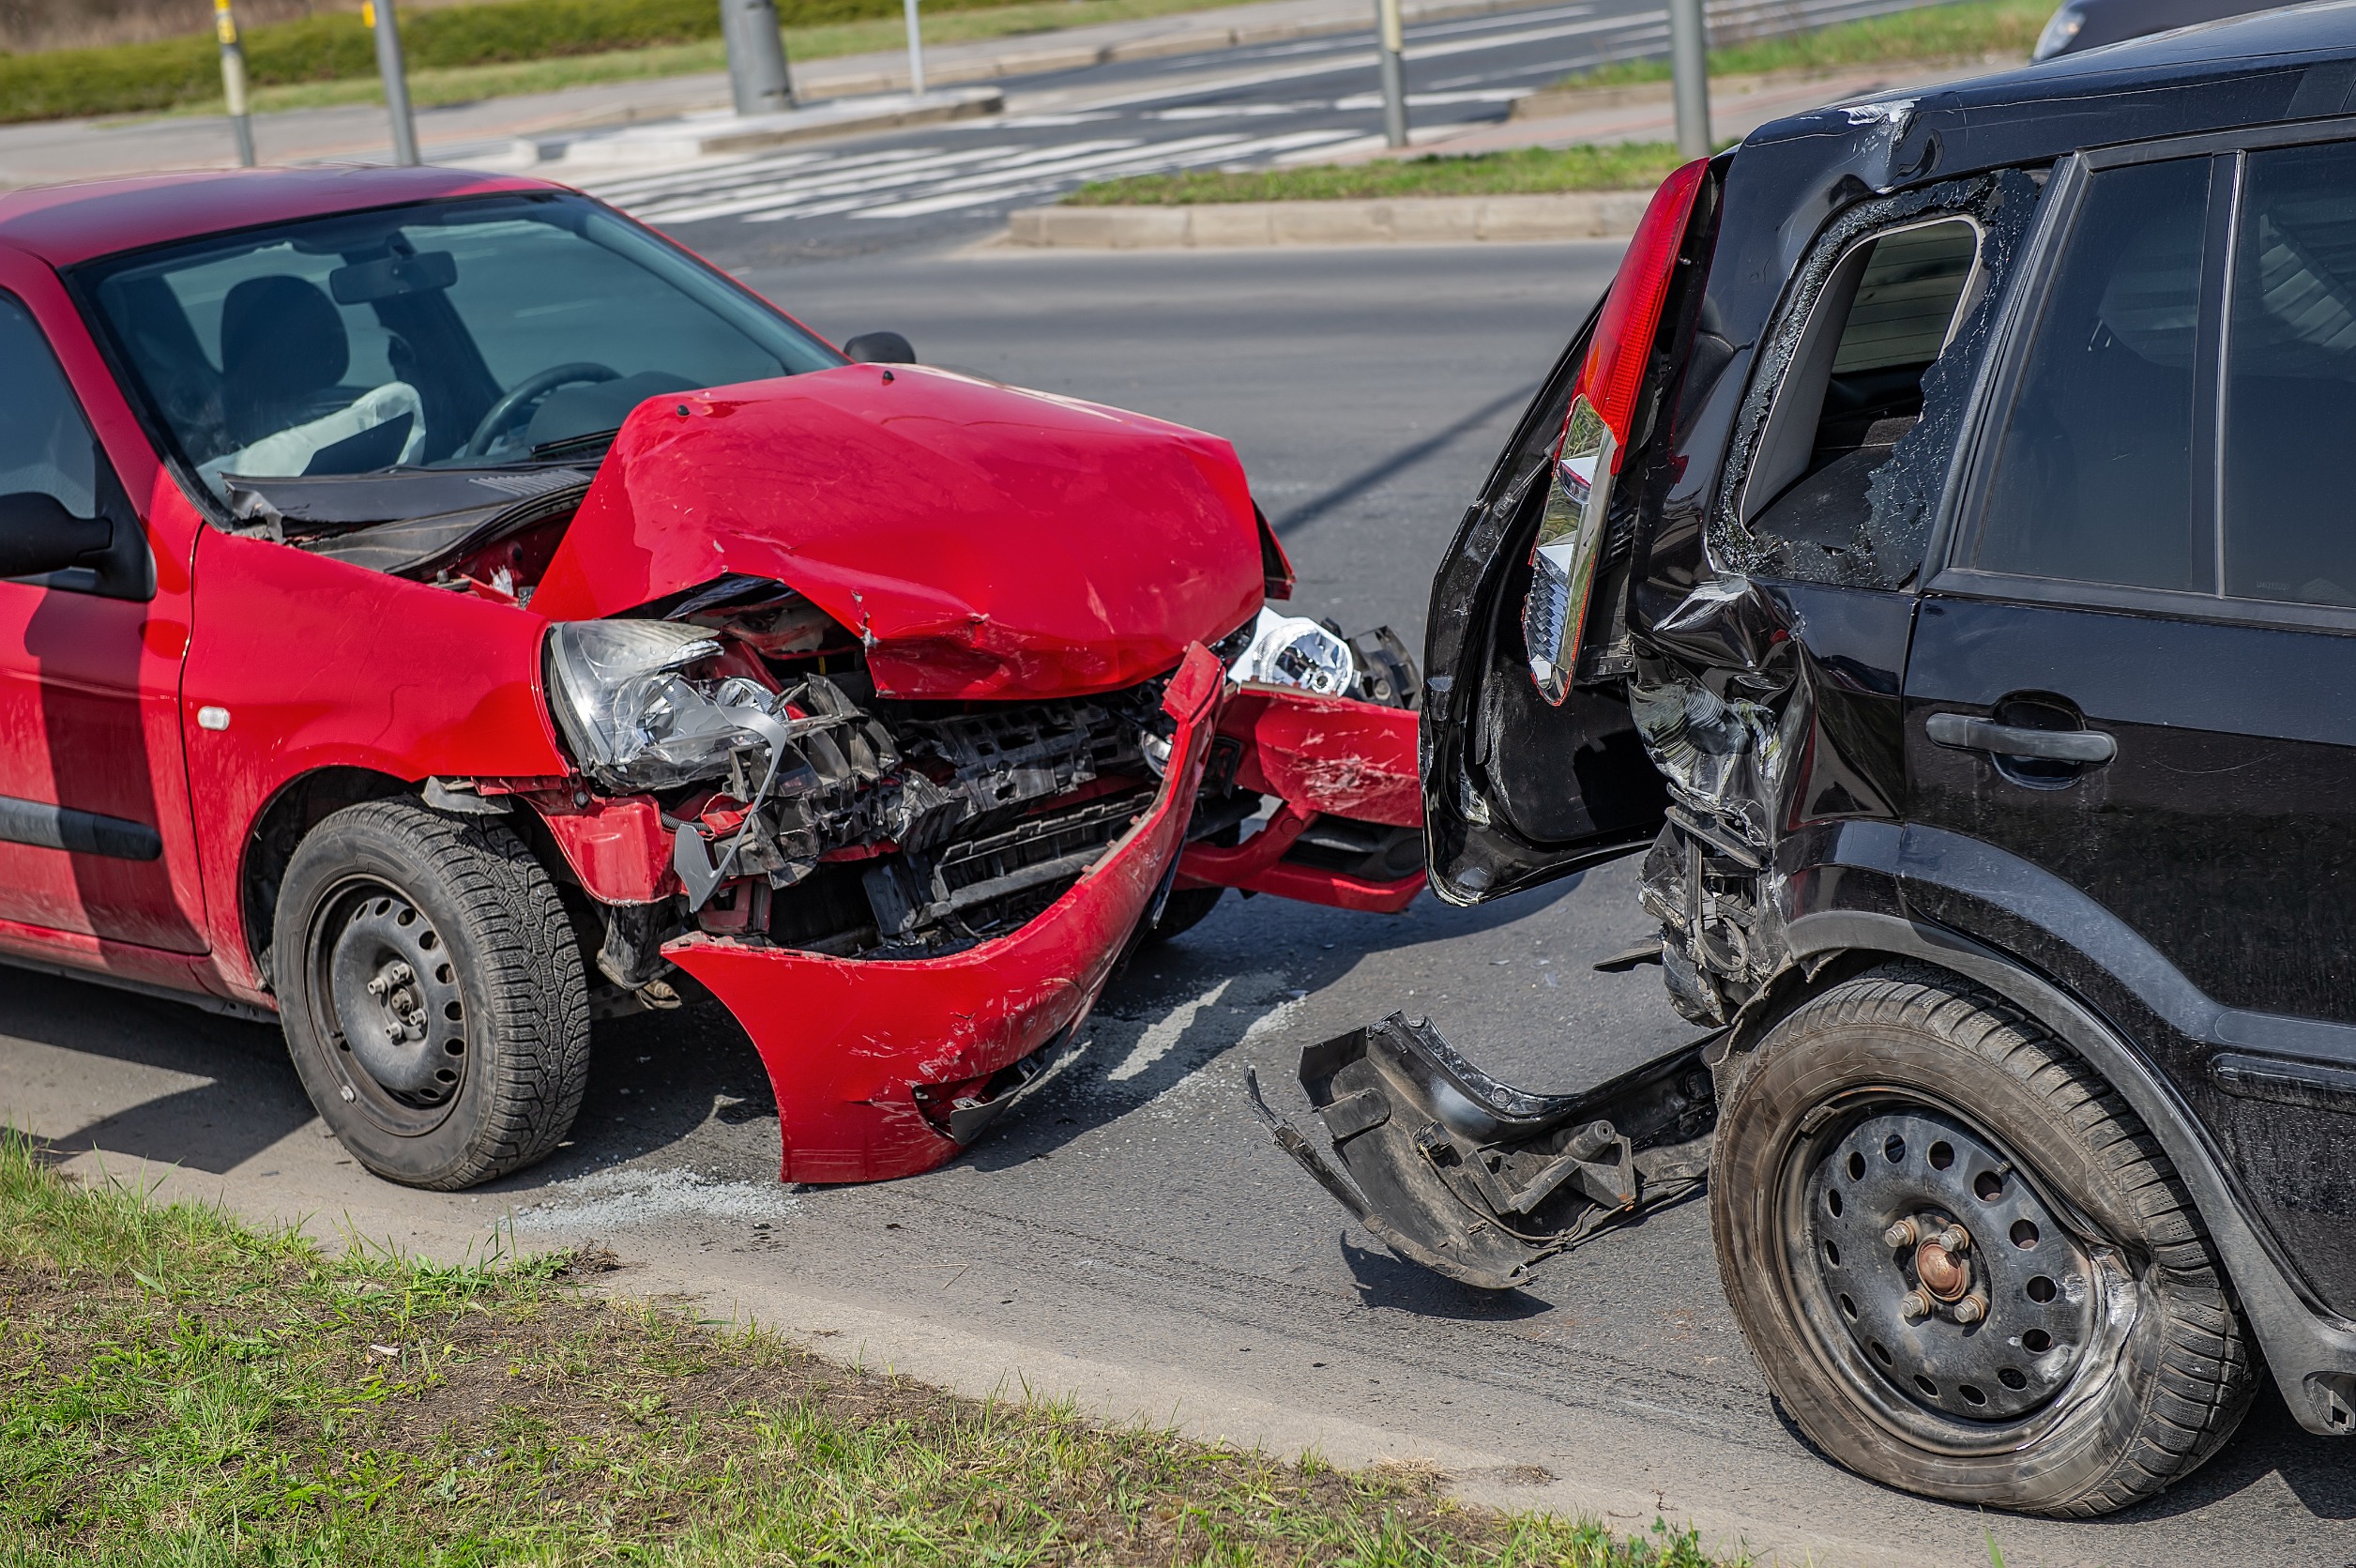 What are your responsibilities after a vehicle accident